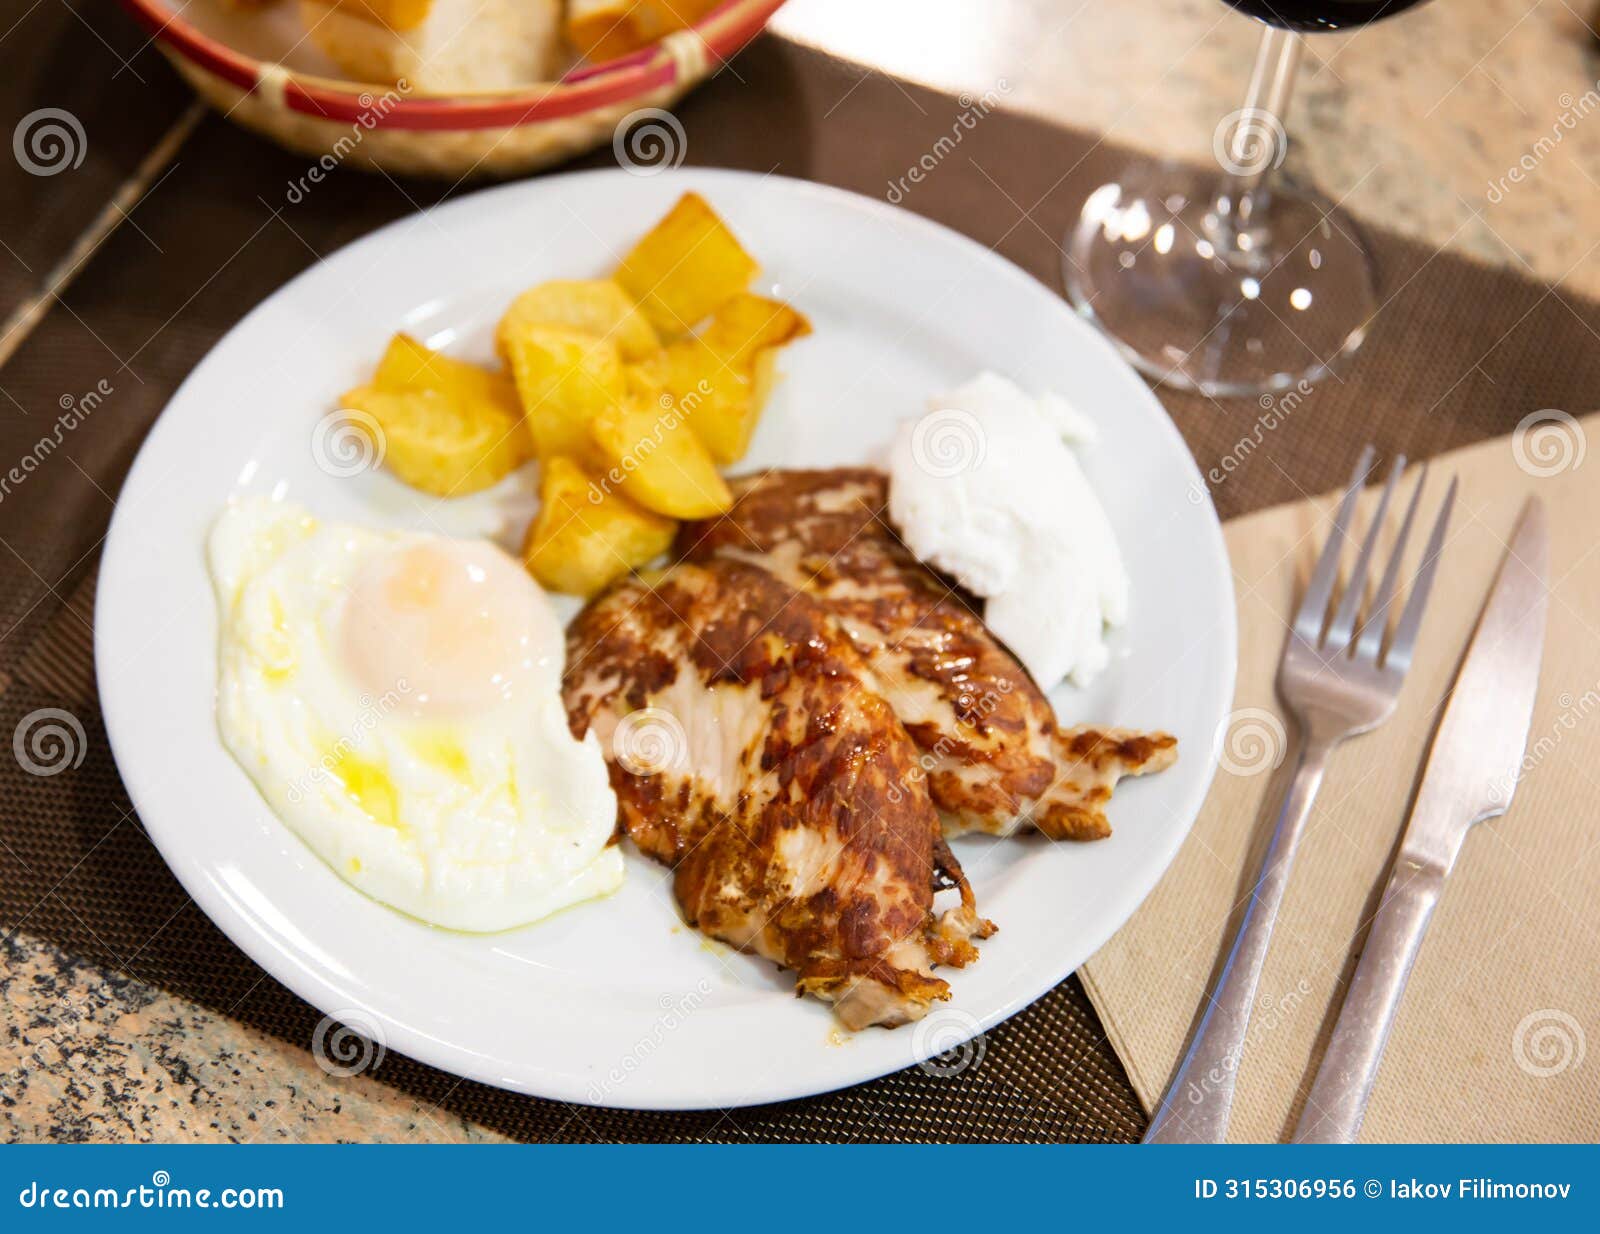 traditional spanish fried pork with potato and egg on plate. cerdo patata eggs